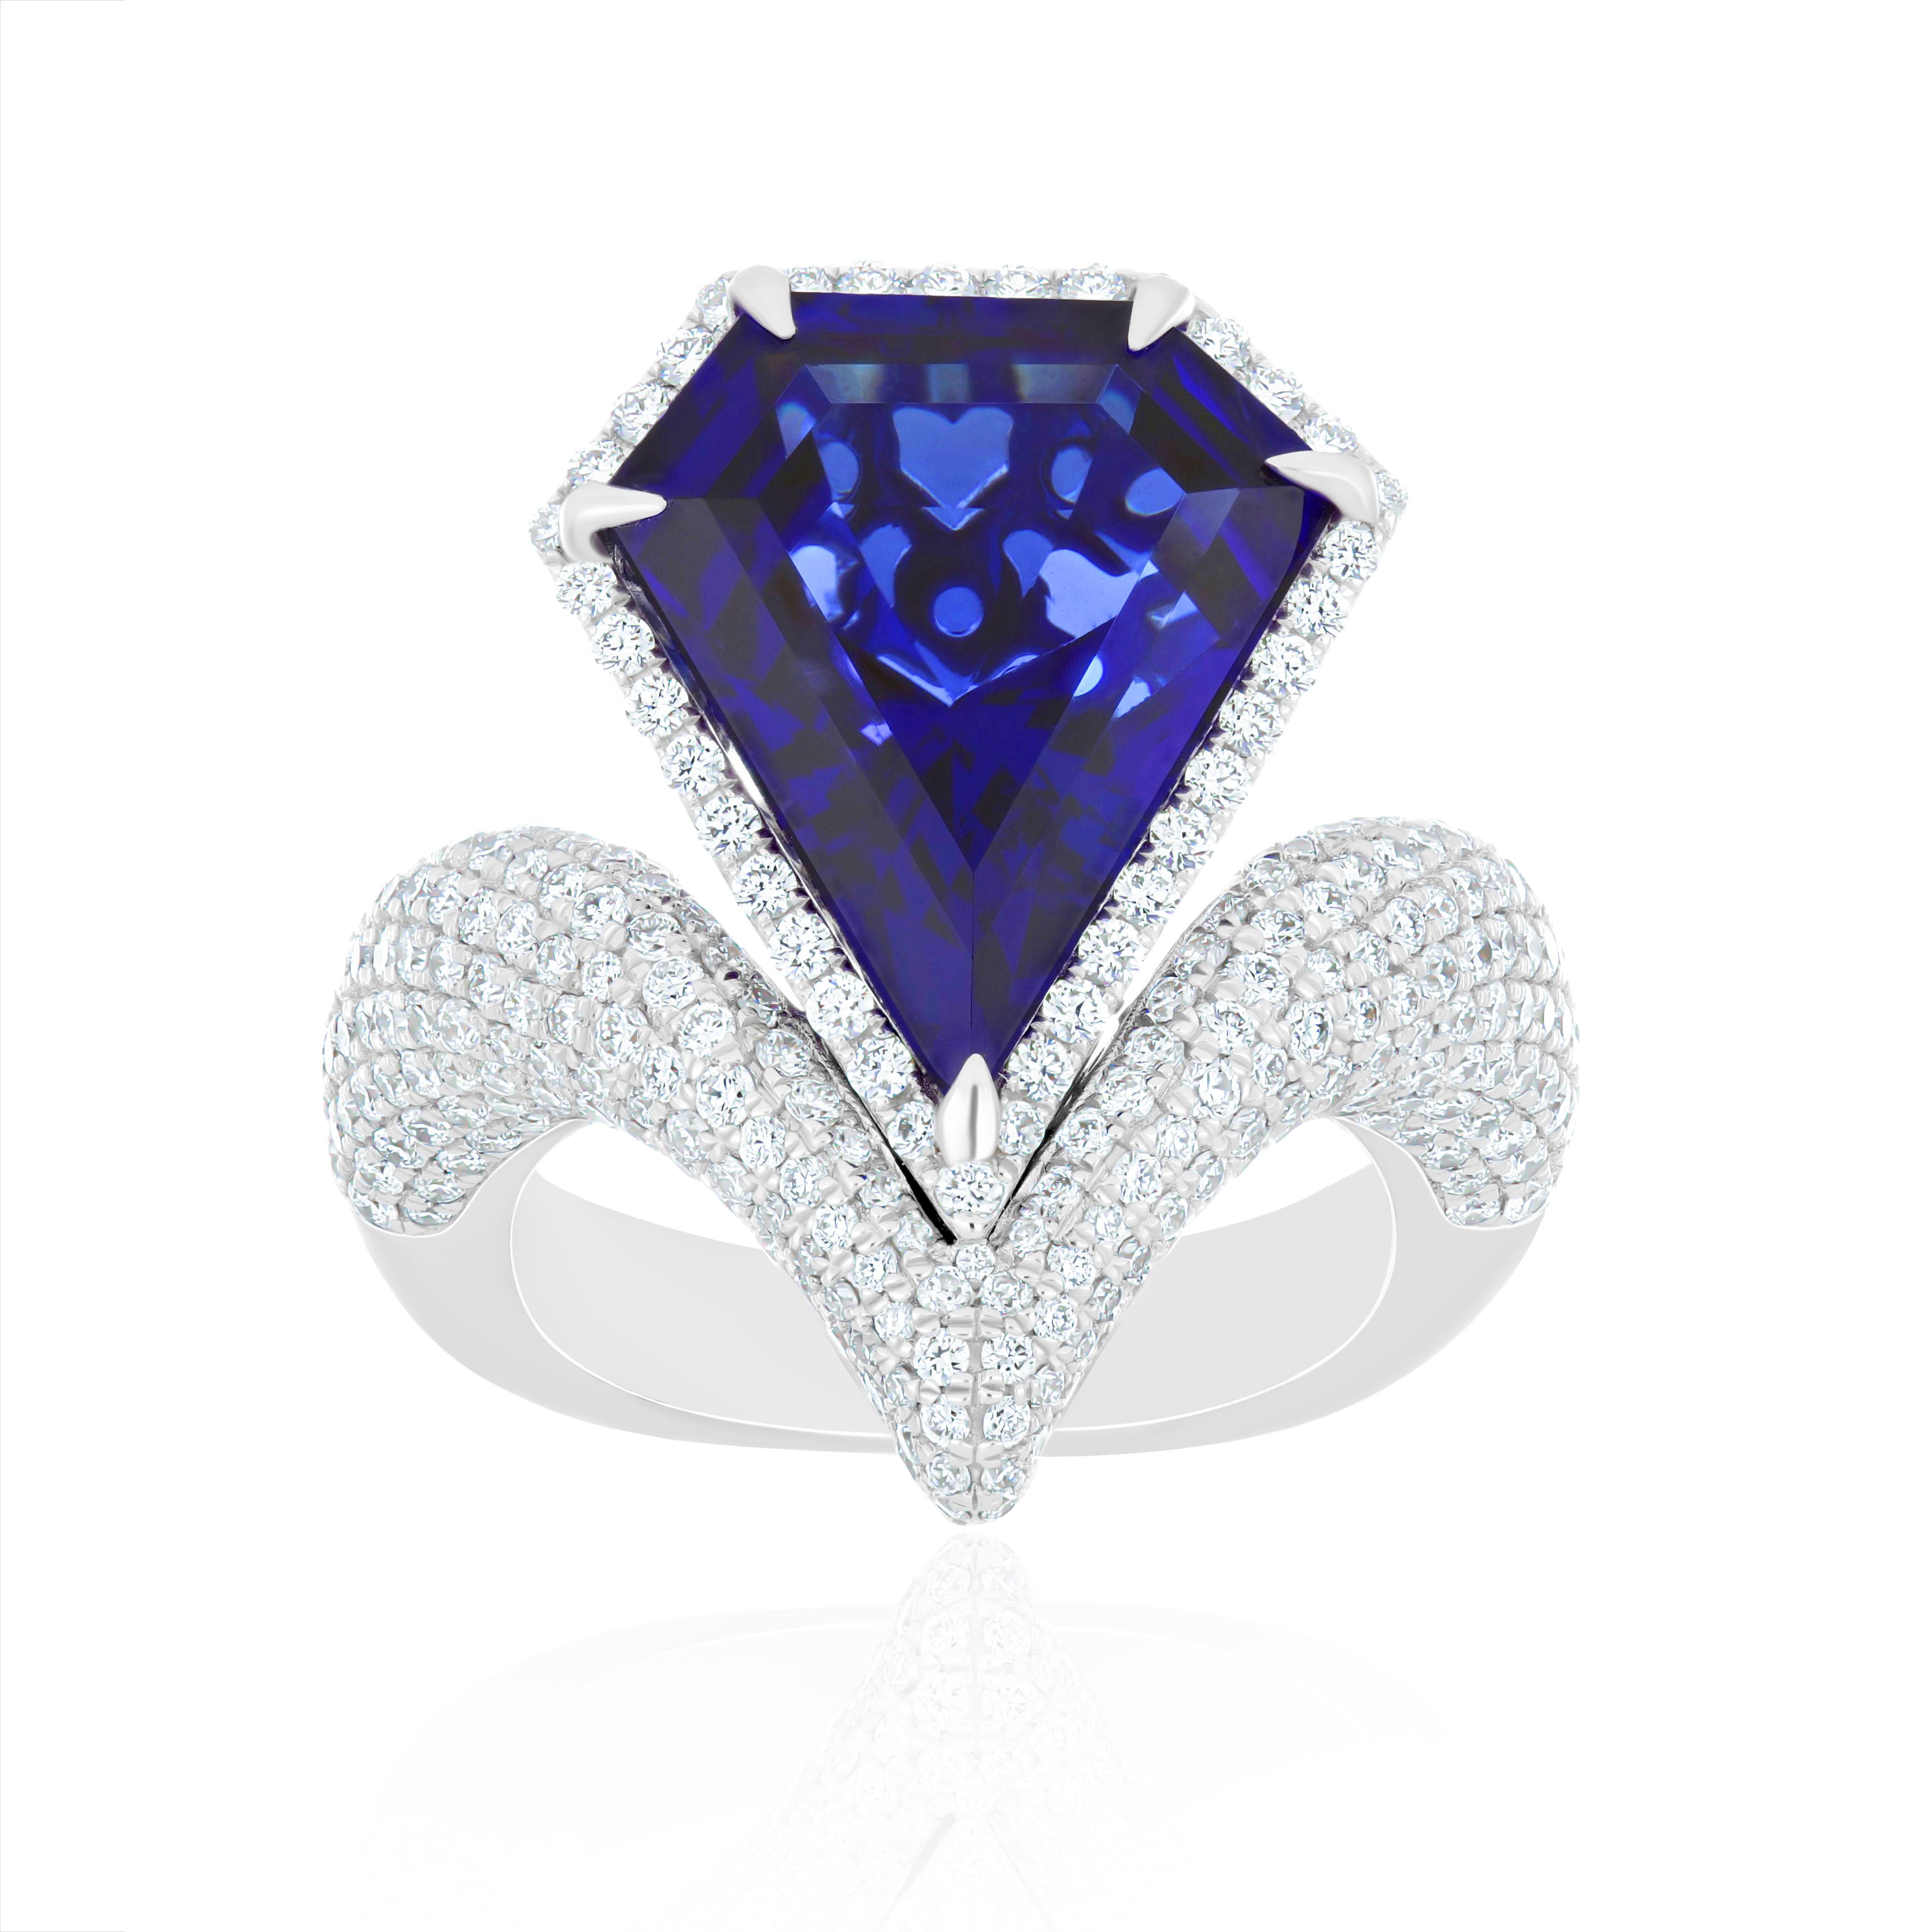 Elegant and Exquisitely detailed White Gold Ring, with a rare 10.8 Cts (approx.) Fancy Shape in faceted Cut 
Tanzanite set in the center beautifully accented with Micro pave set Diamonds, weighing approx. 2.2 CT's (approx.). total carats weight the